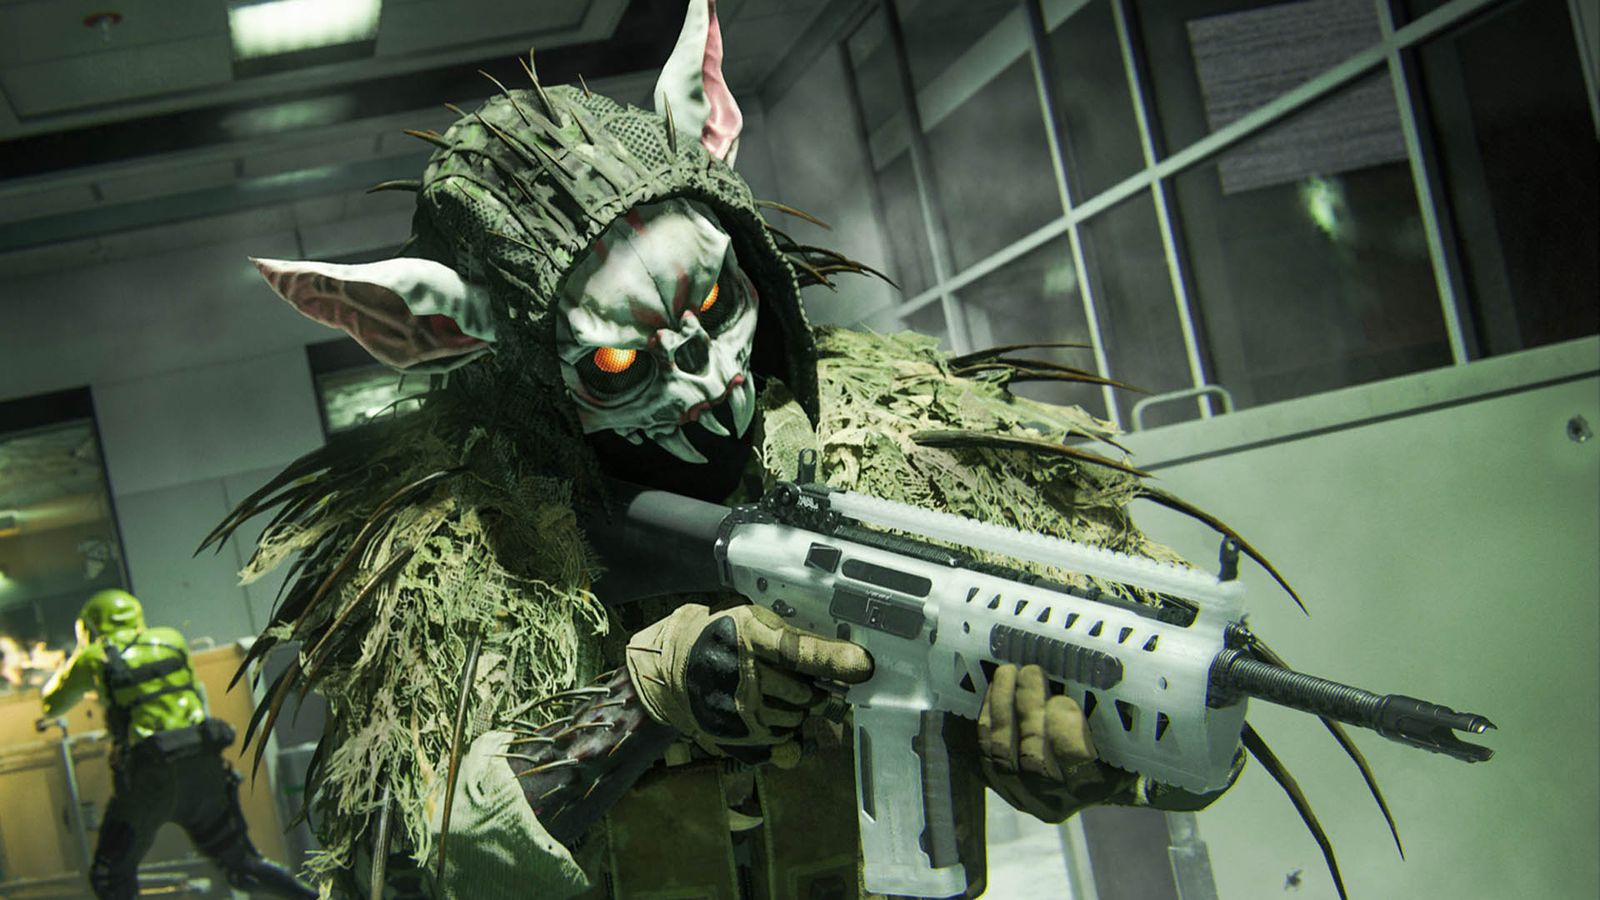 Warzone player holding SMG while wearing spooky rabbit mask